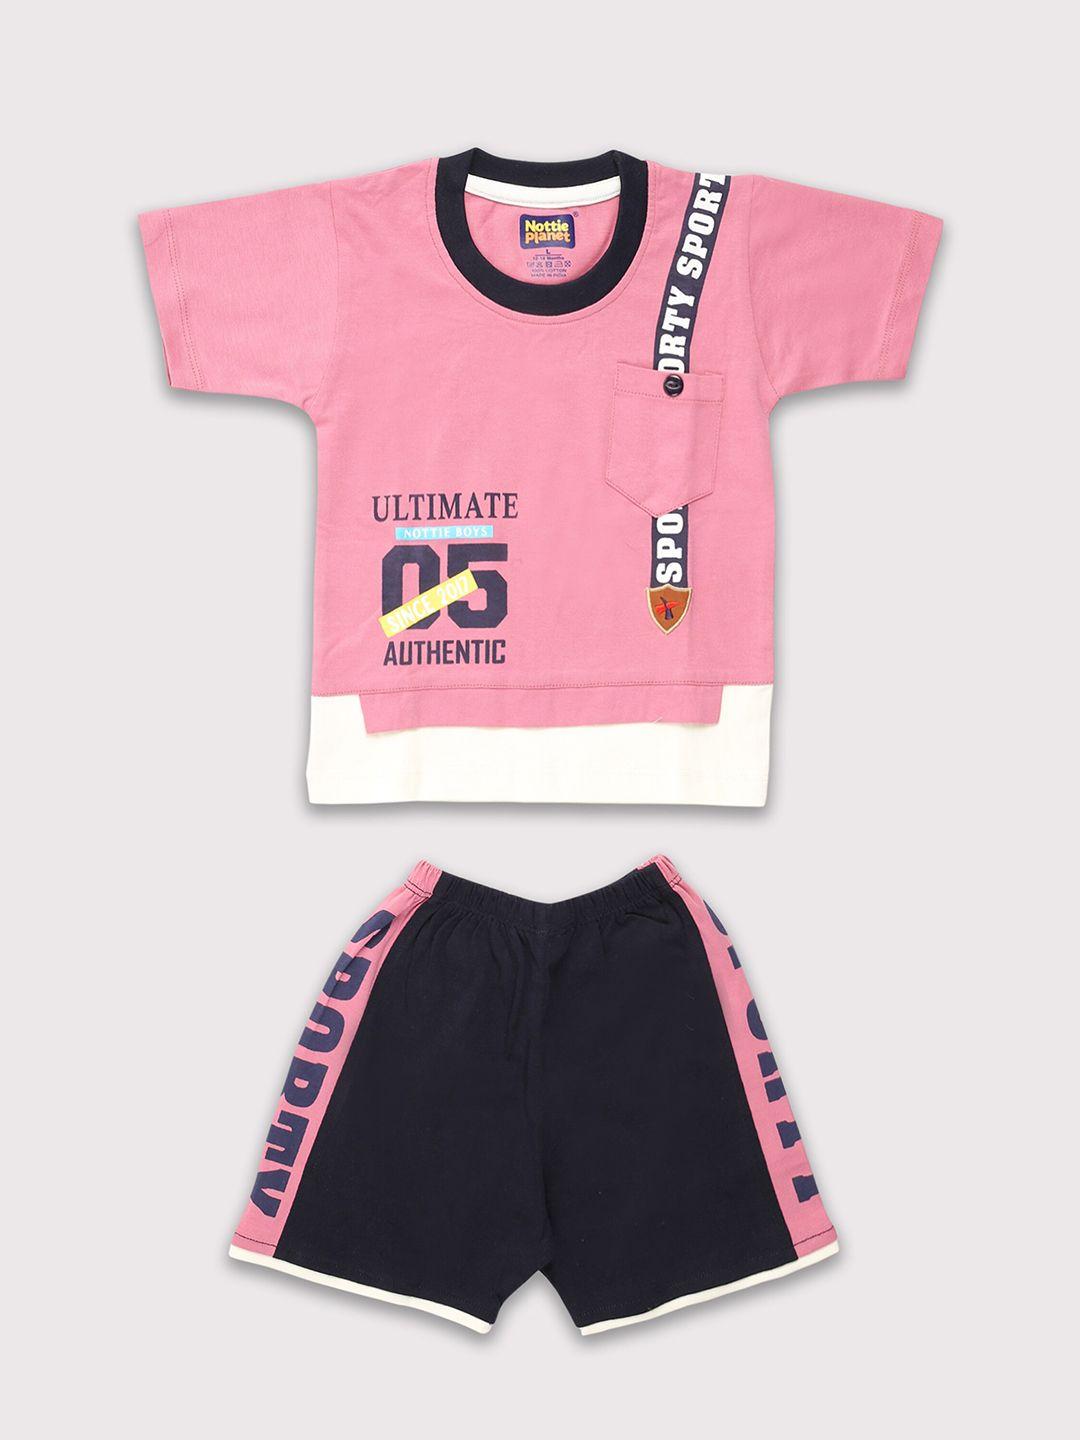 nottie planet boys printed pure cotton t-shirt with shorts set